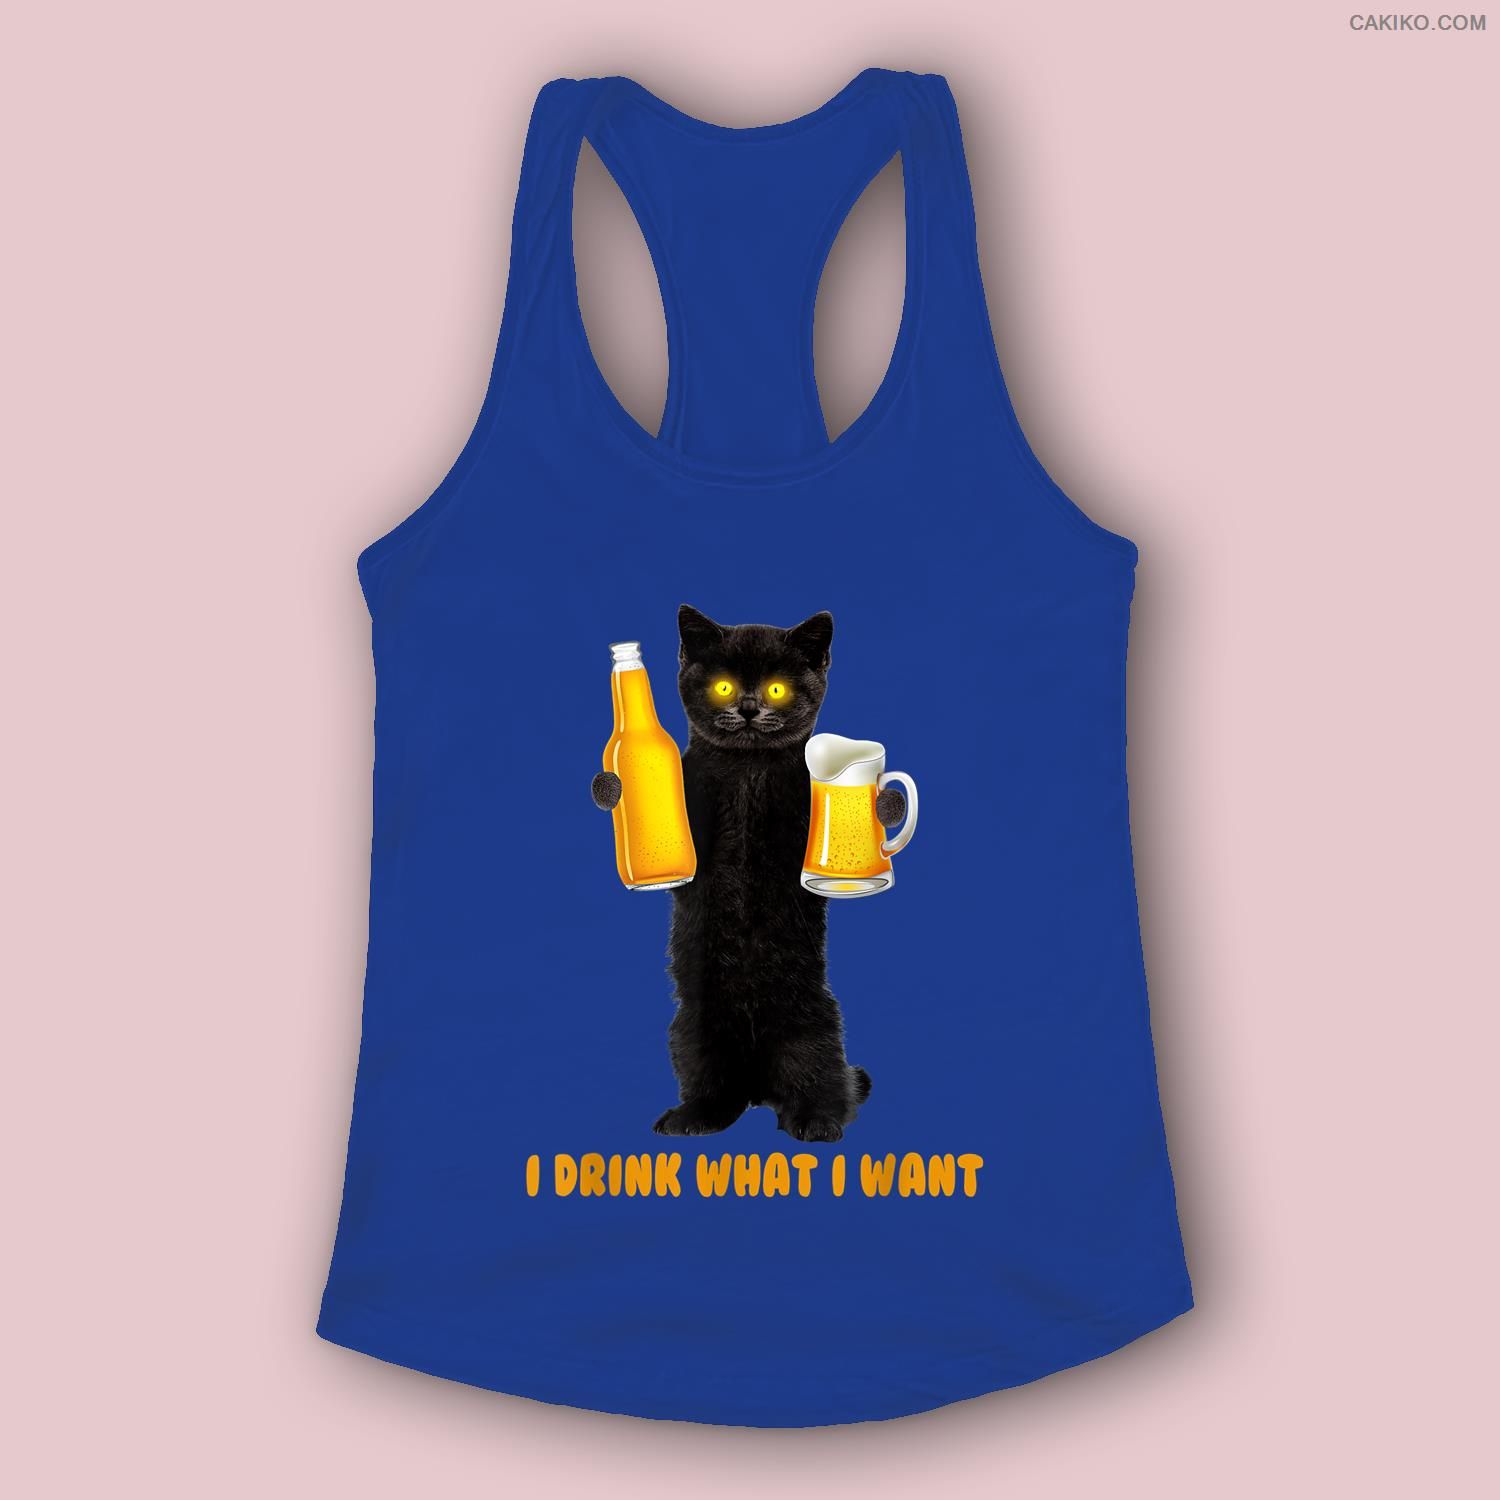 I Drink What I Want Funny Black Cat Holds Beer Drinking Team Women, Men Tank Top